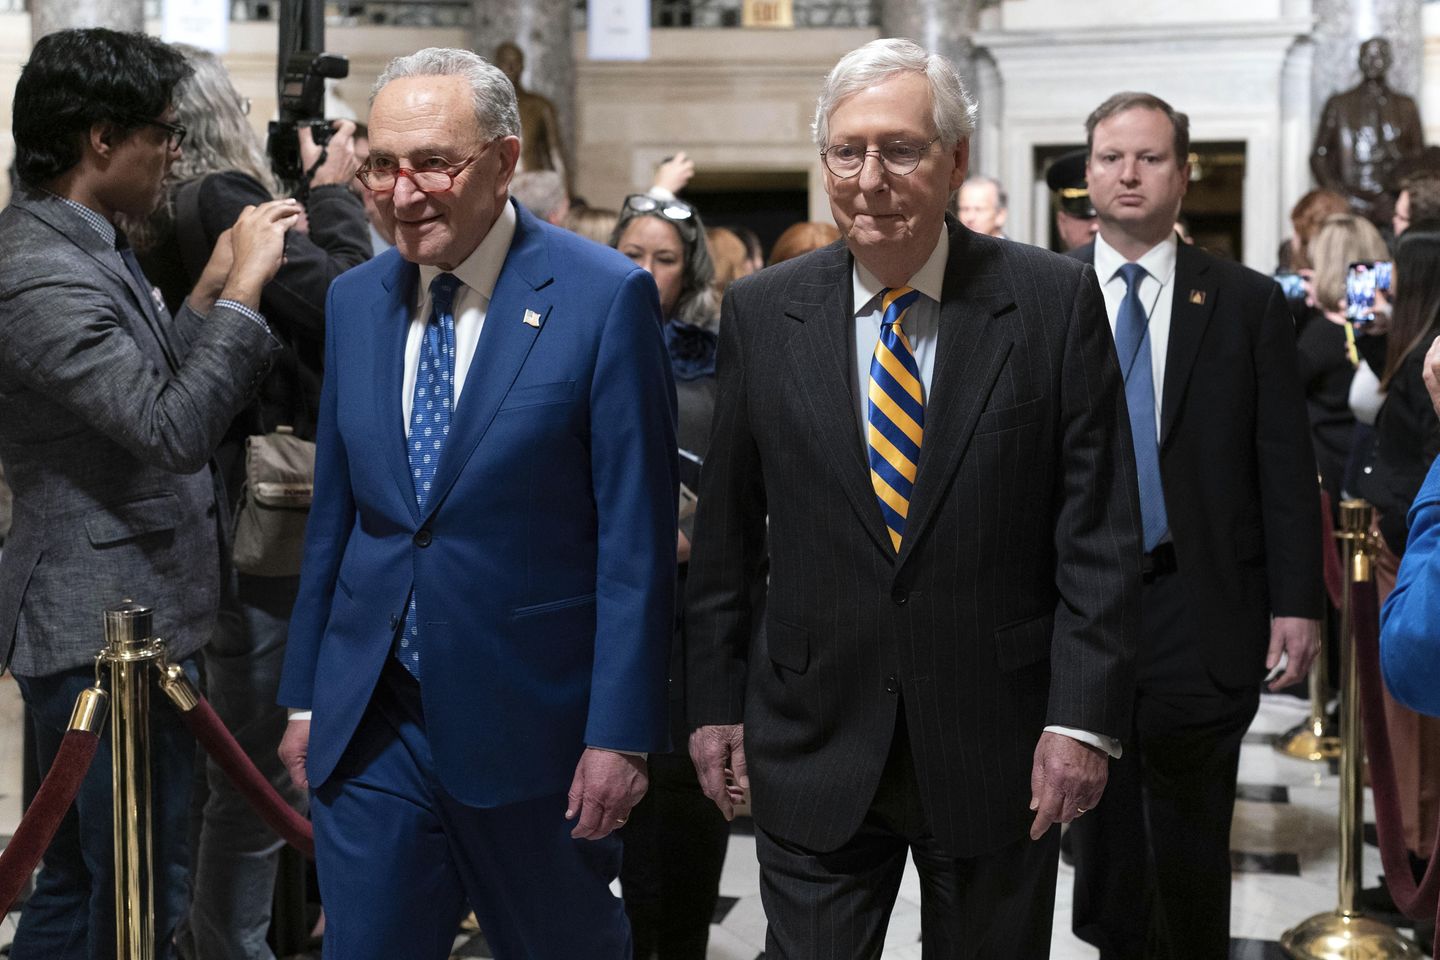 McConnell, Schumer urge swift passage of debt-limit deal as hardliners defect